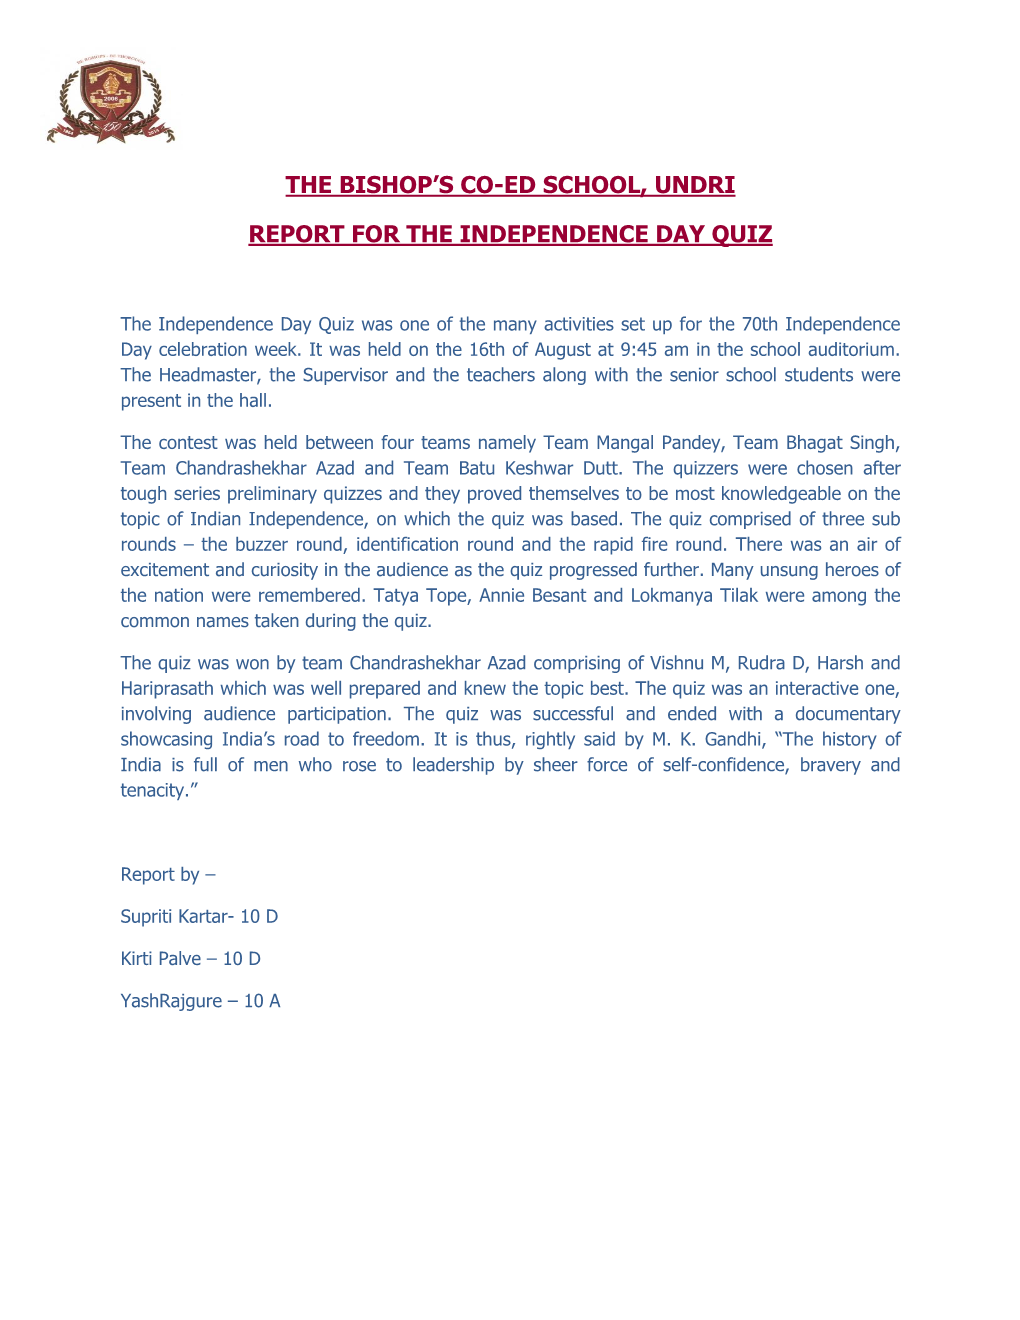 The Bishop's Co-Ed School, Undri Report for the Independence Day Quiz